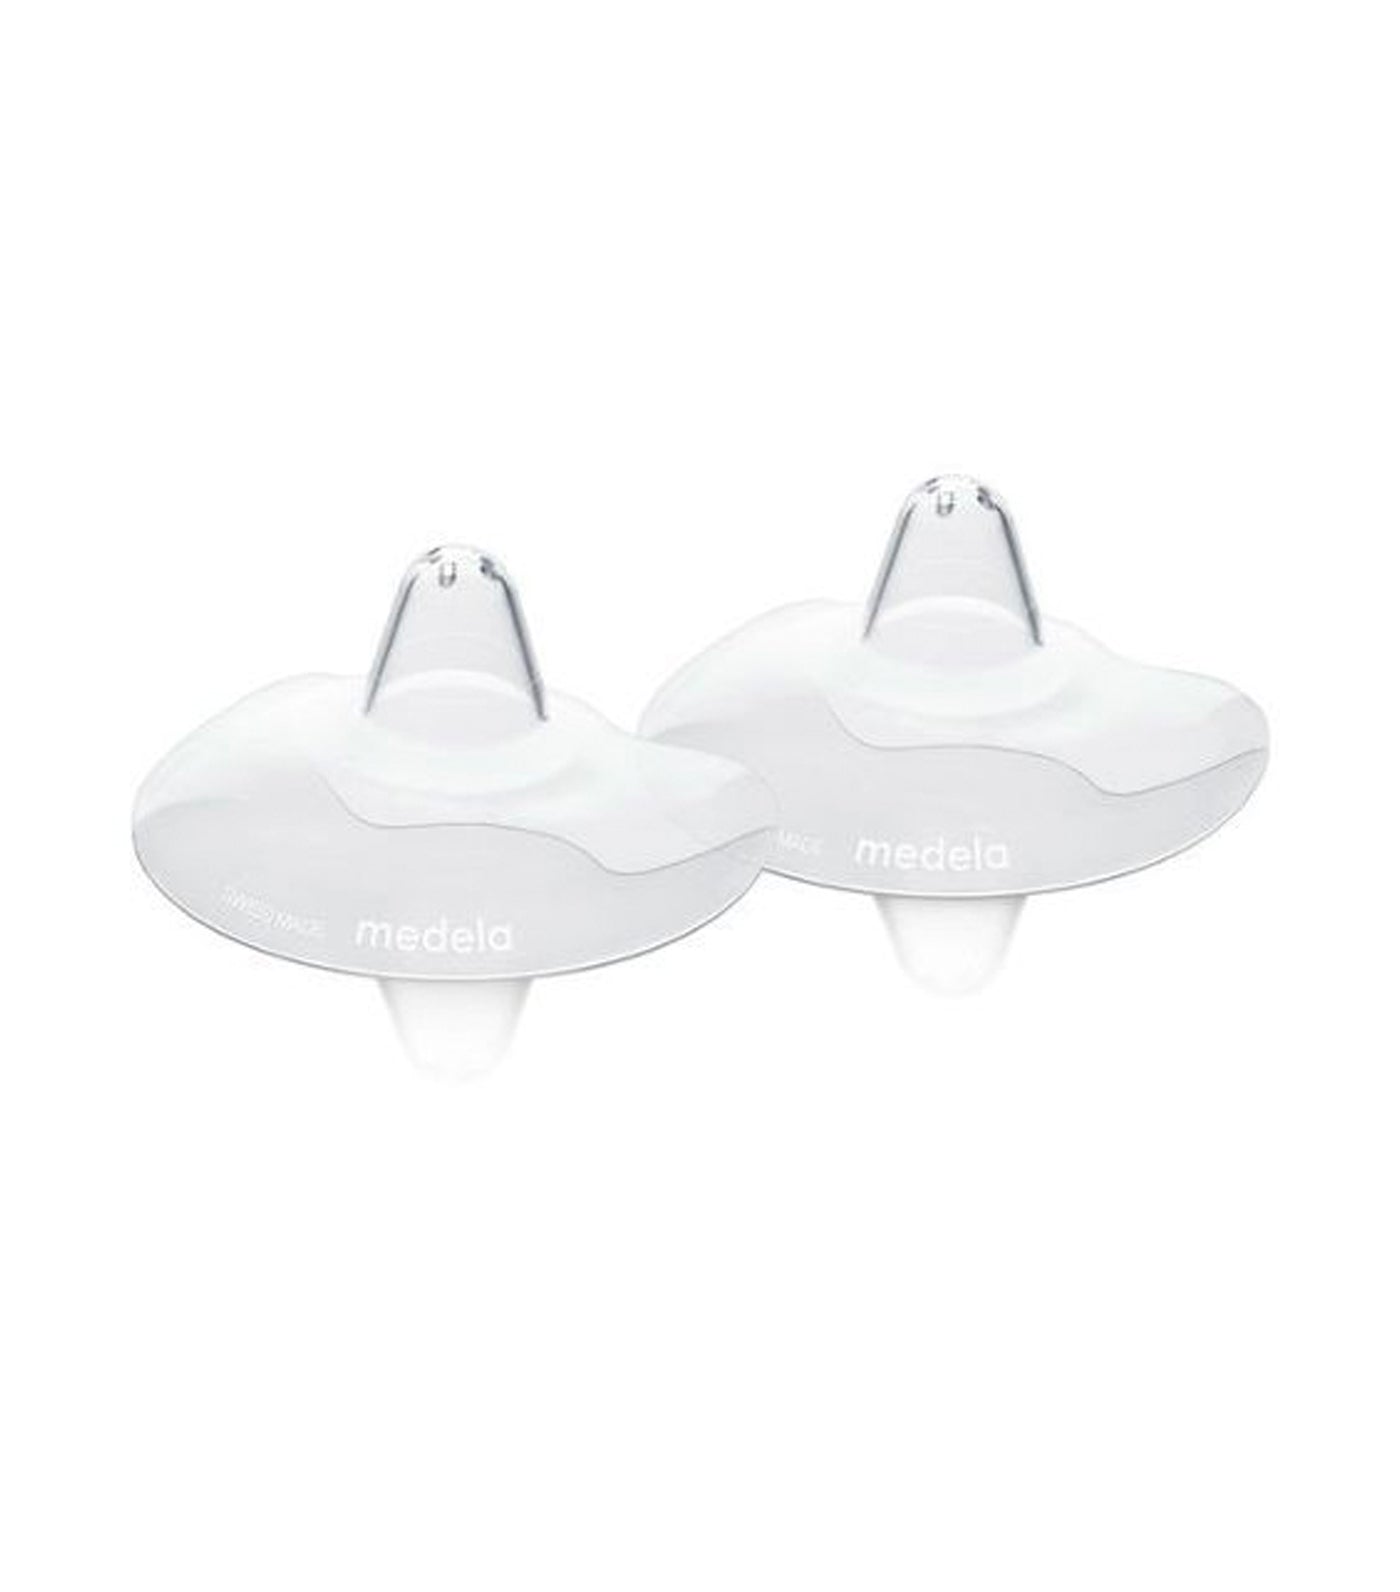 medela contact nipple shields (small)